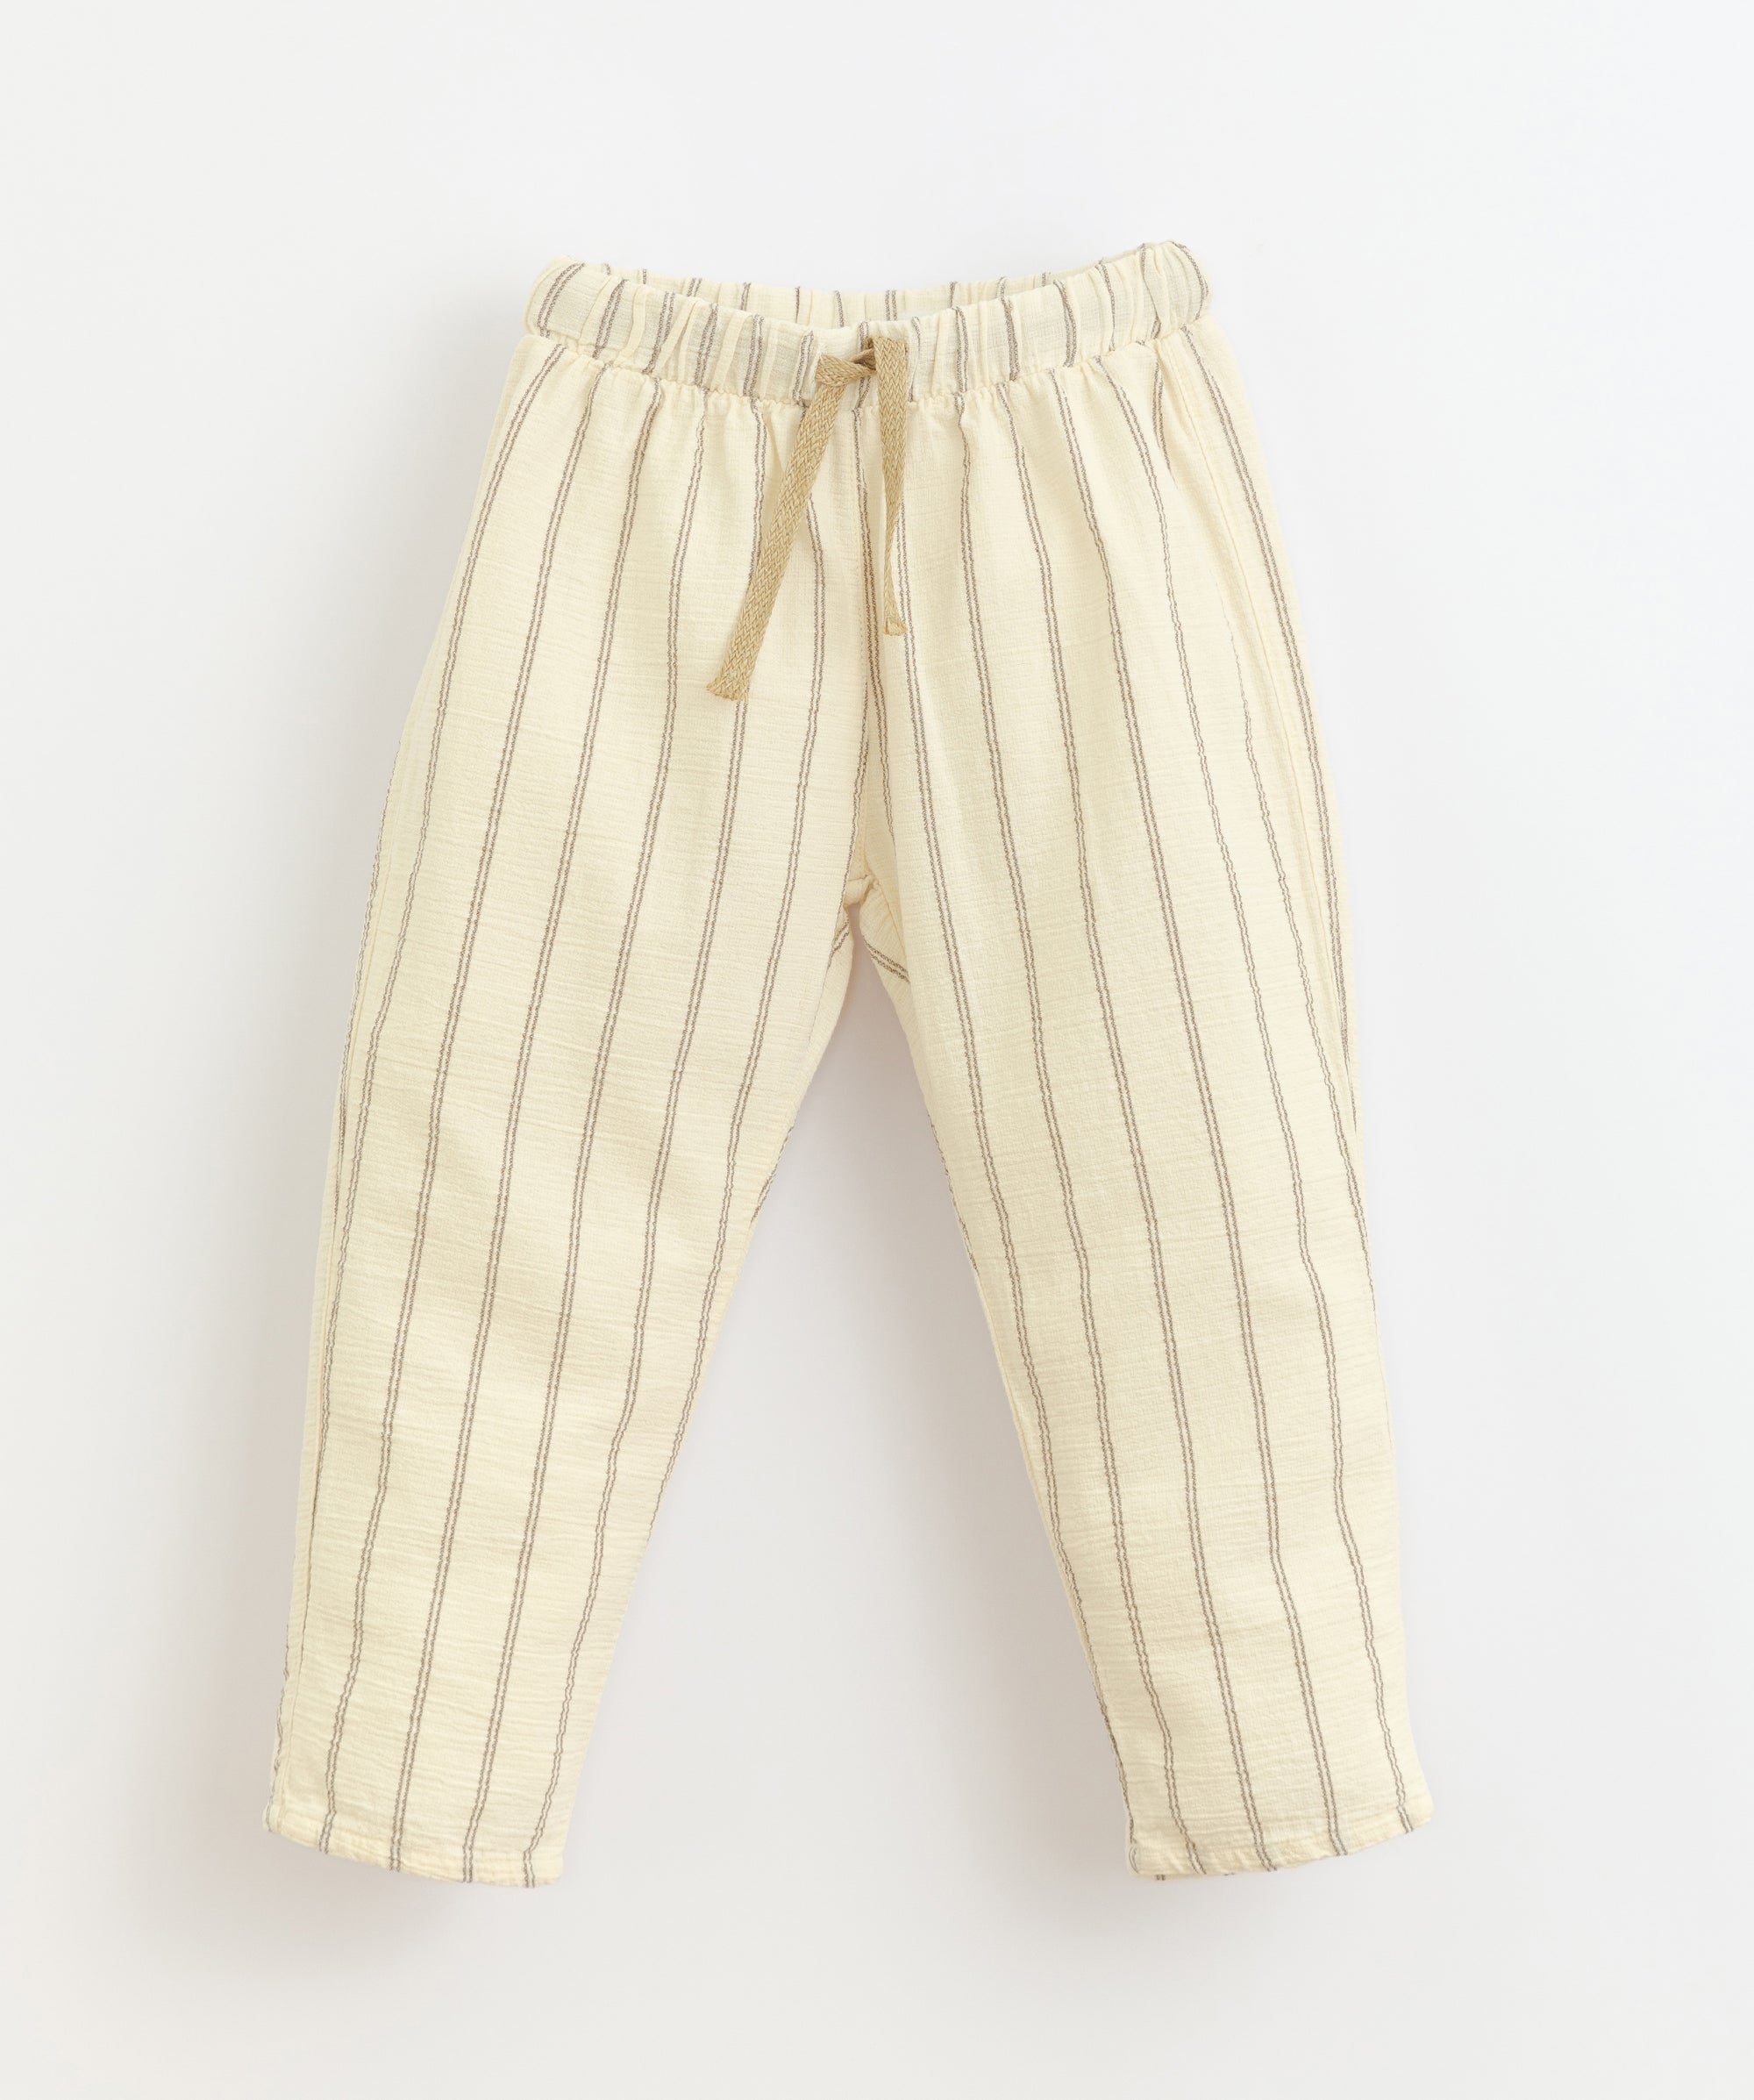 Baige trousers made of a mixture of woven and organic cotton. It has an elastic waist with an adjustable linen cord and one rear pocket. Made by Play Up.